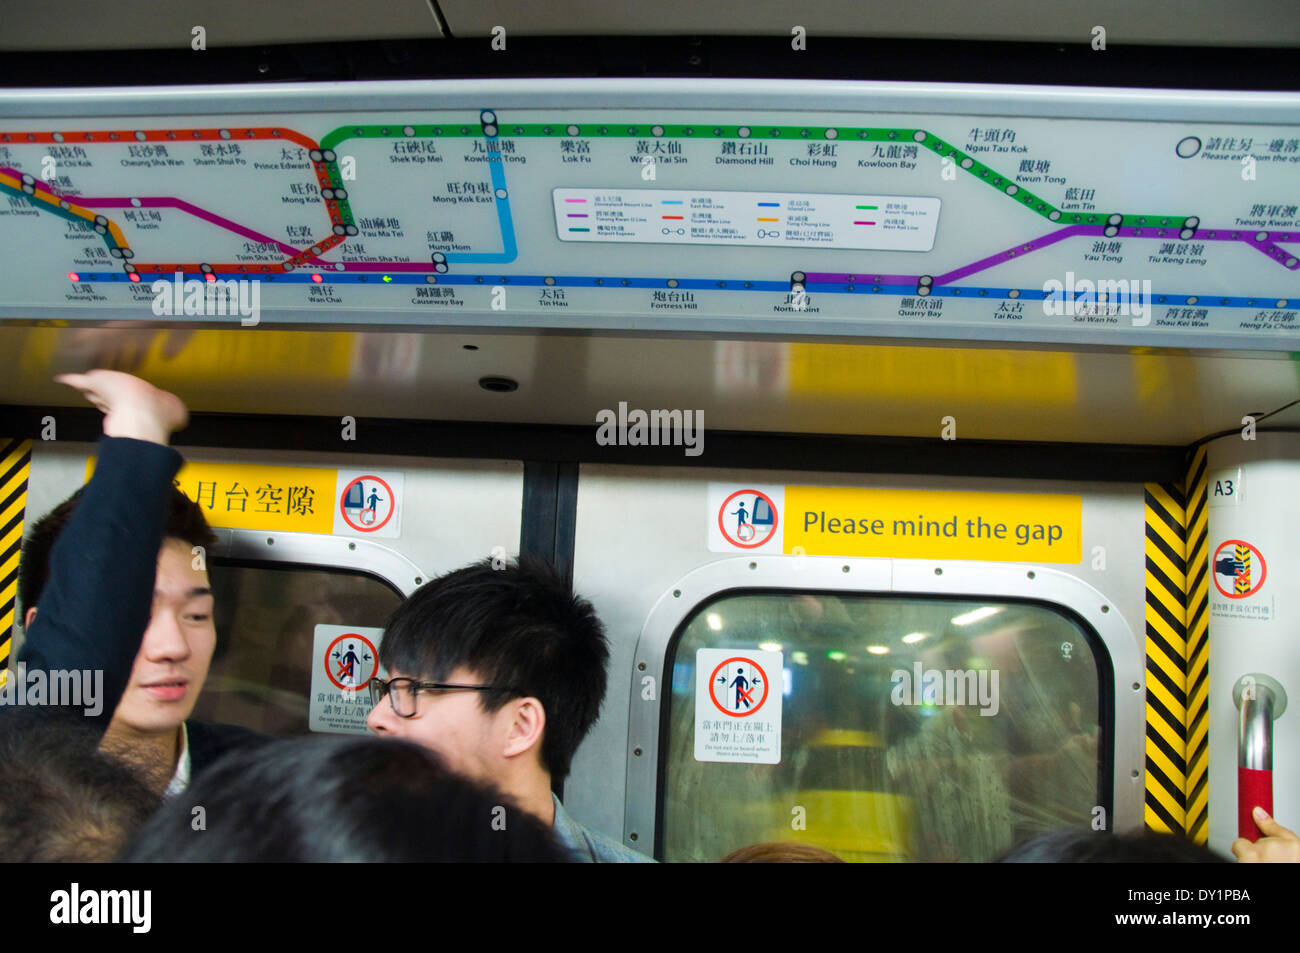 Passengers Board A Carriage On Mtr Metro Subway Train In Hong Kong